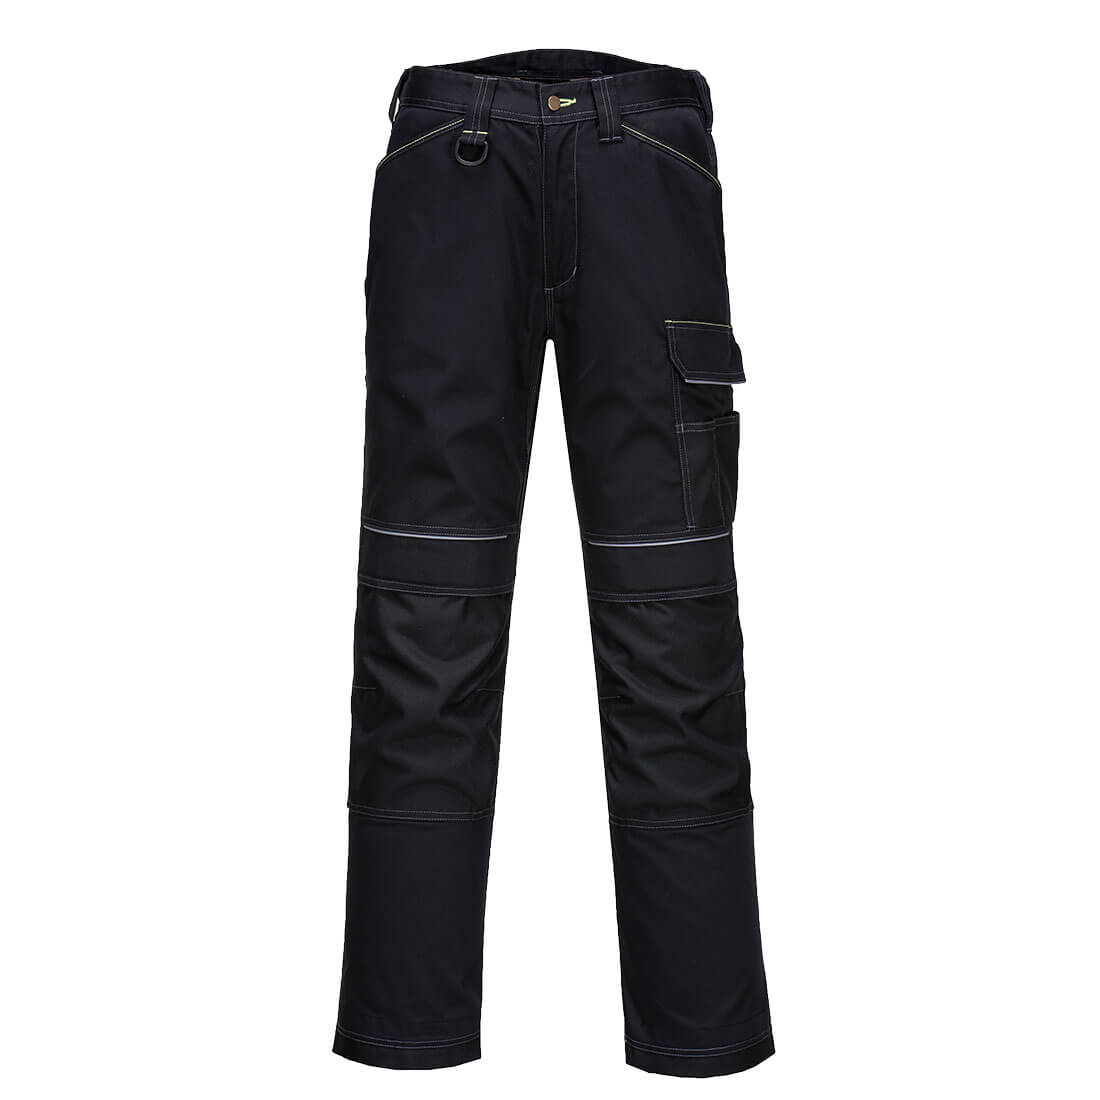 PW358 - PW3 Lined Winter Work Trousers Black